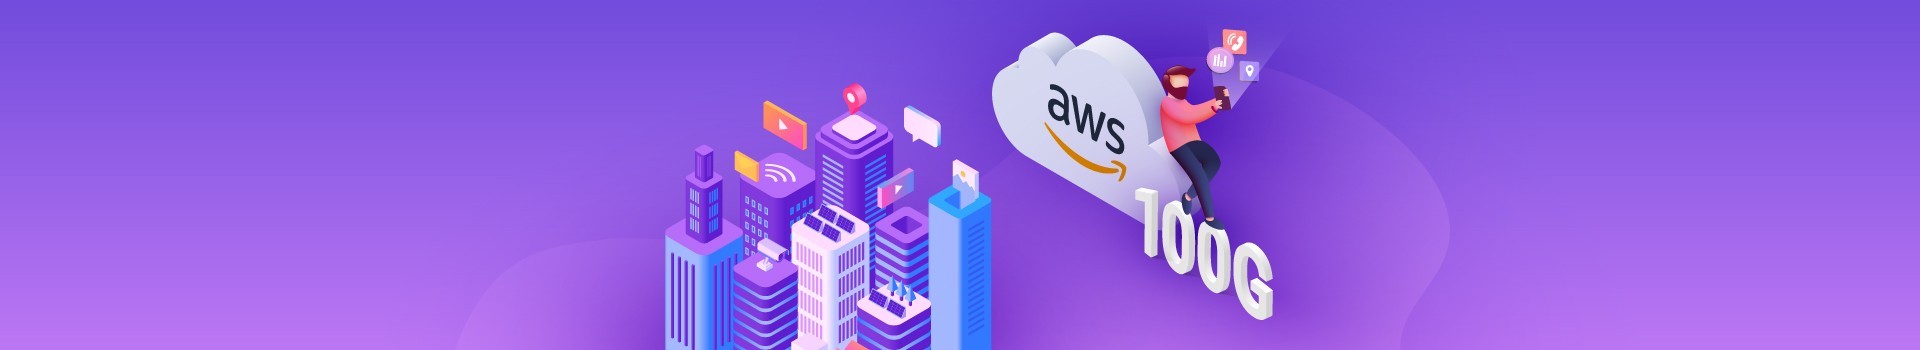 AWS Direct Connect 100Gbps – The Only High-Speed On-Ramp You Need